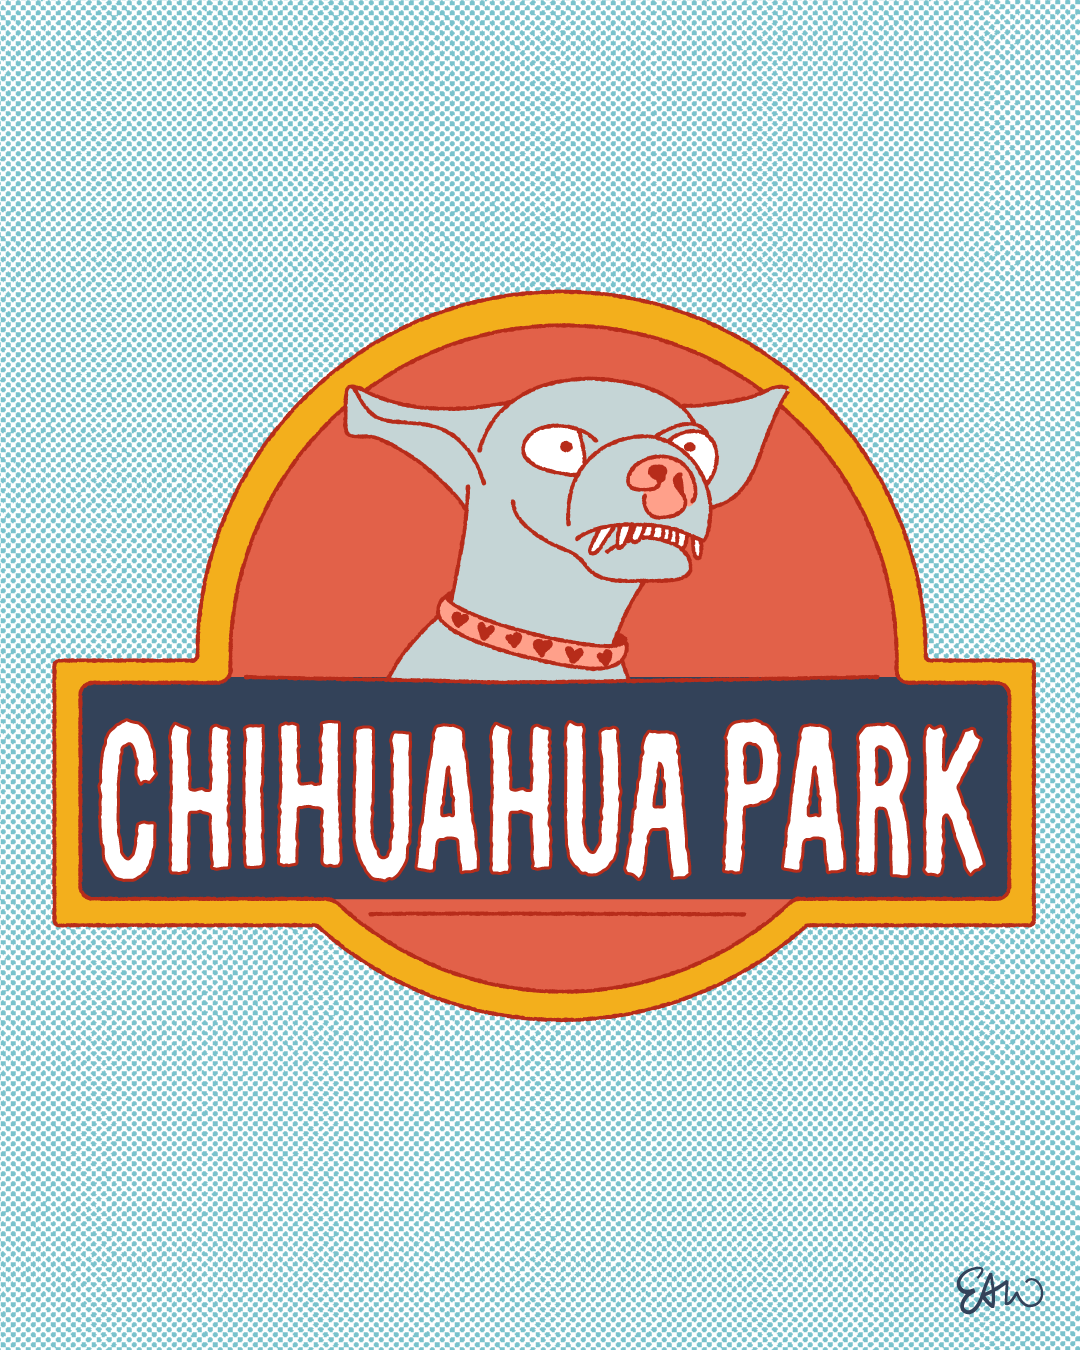 Cartoon illustration drawn in a retro style with a minimal palette of faded blues, reds and yellows with halftones for shading. At the centre of the composition is a logo design reminiscent of the original “Jurassic Park” poster, but instead has the word-mark, “Chihuahua Park” stretched across an illustration of a growling Chihuahua instead of a Tyrannosaurus Rex.